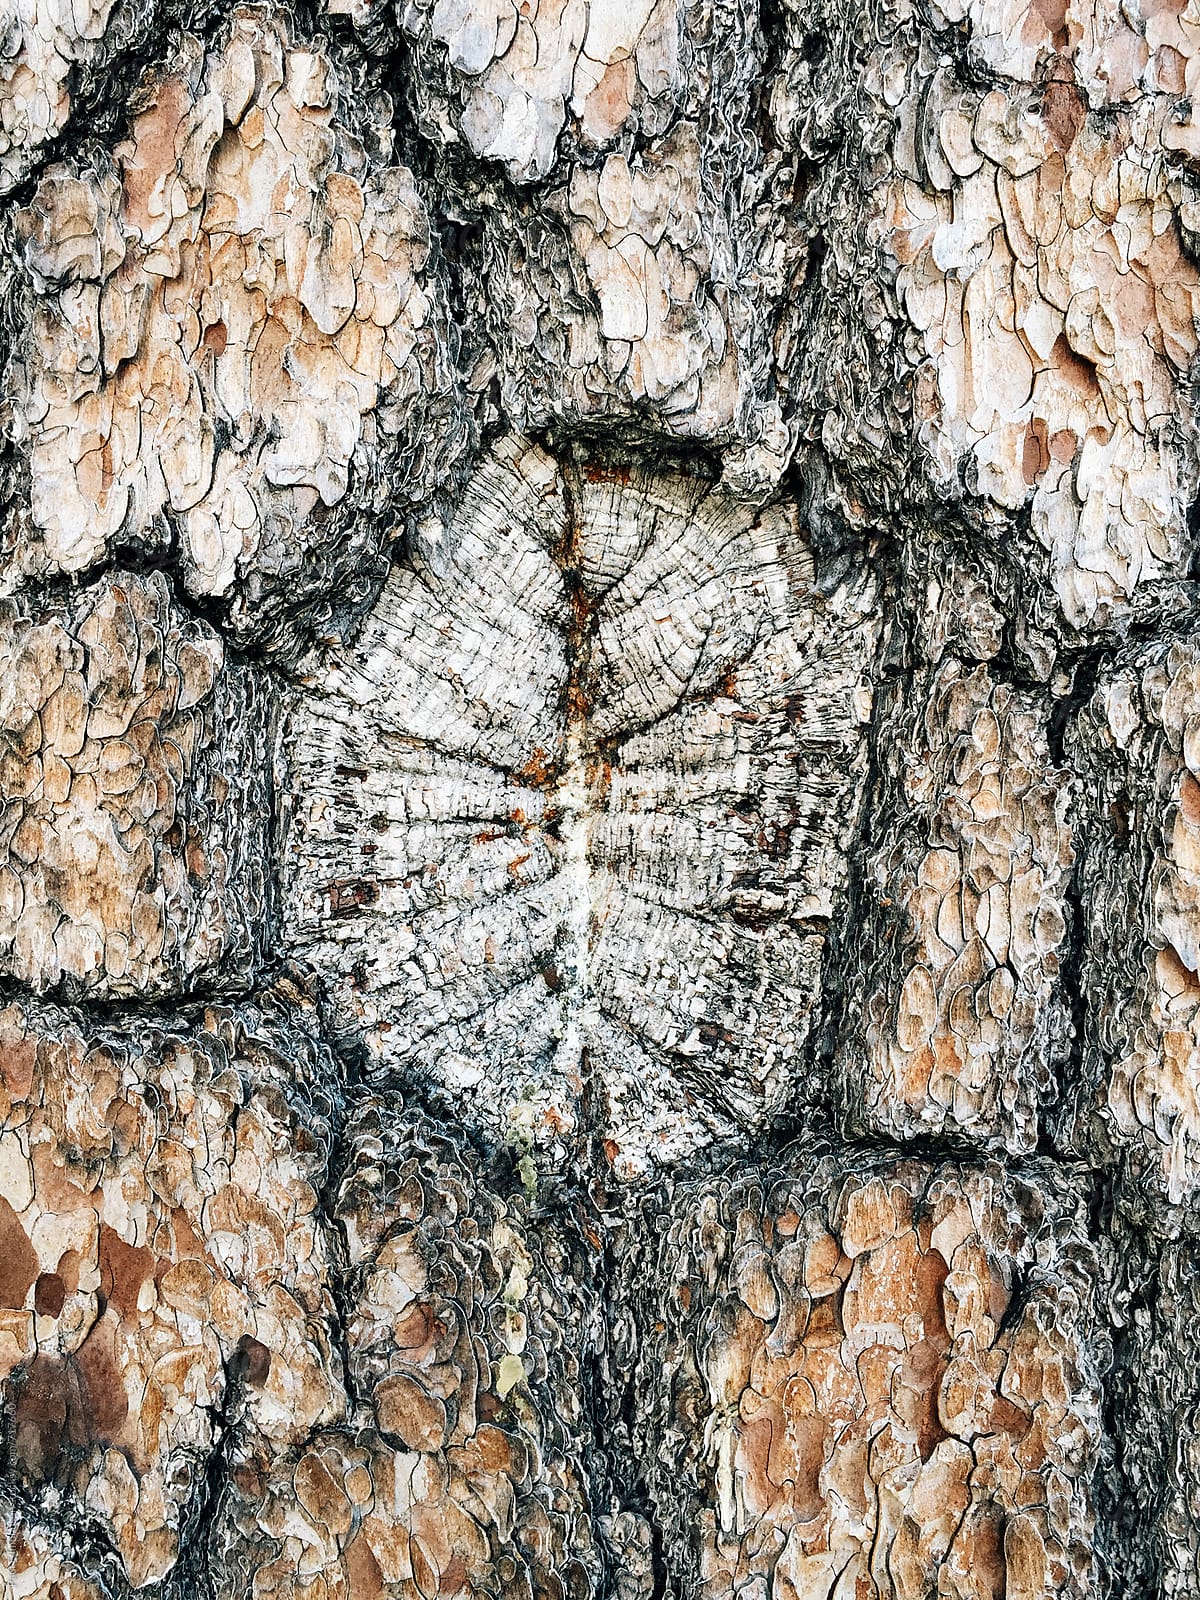 Close up of bark from old growth White pine tree